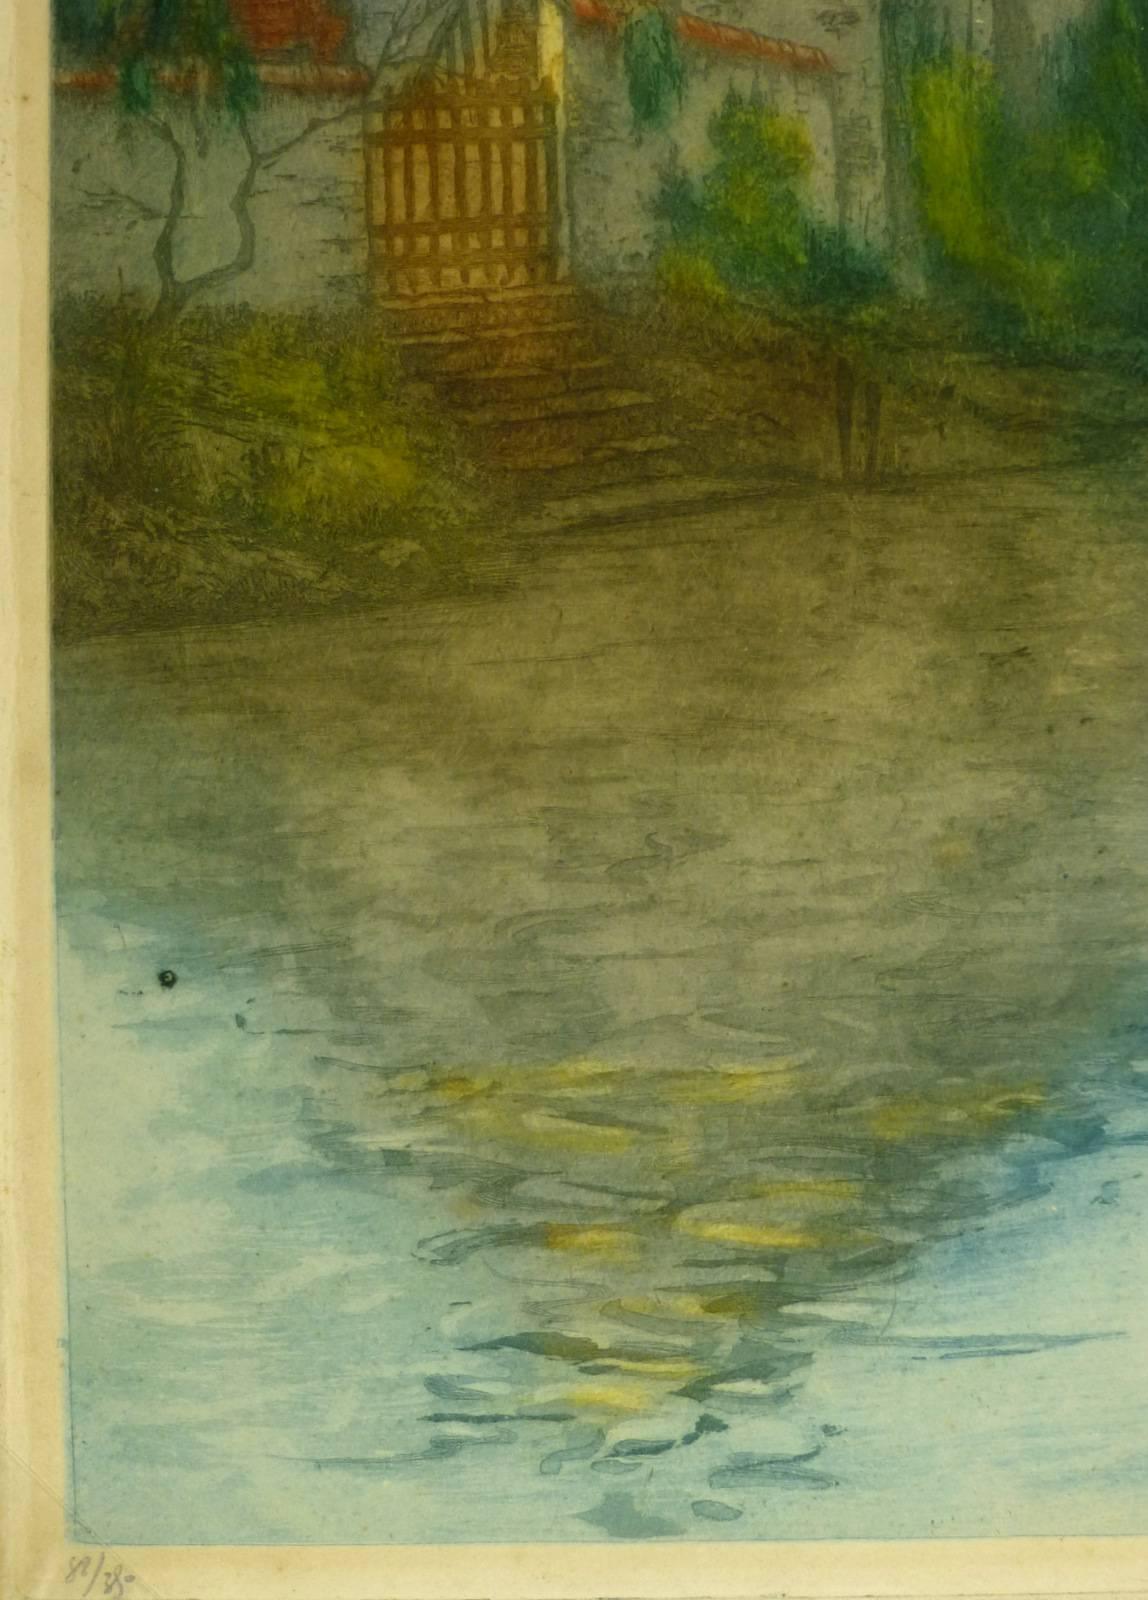 Stone Bridge over River - Painting by Unknown